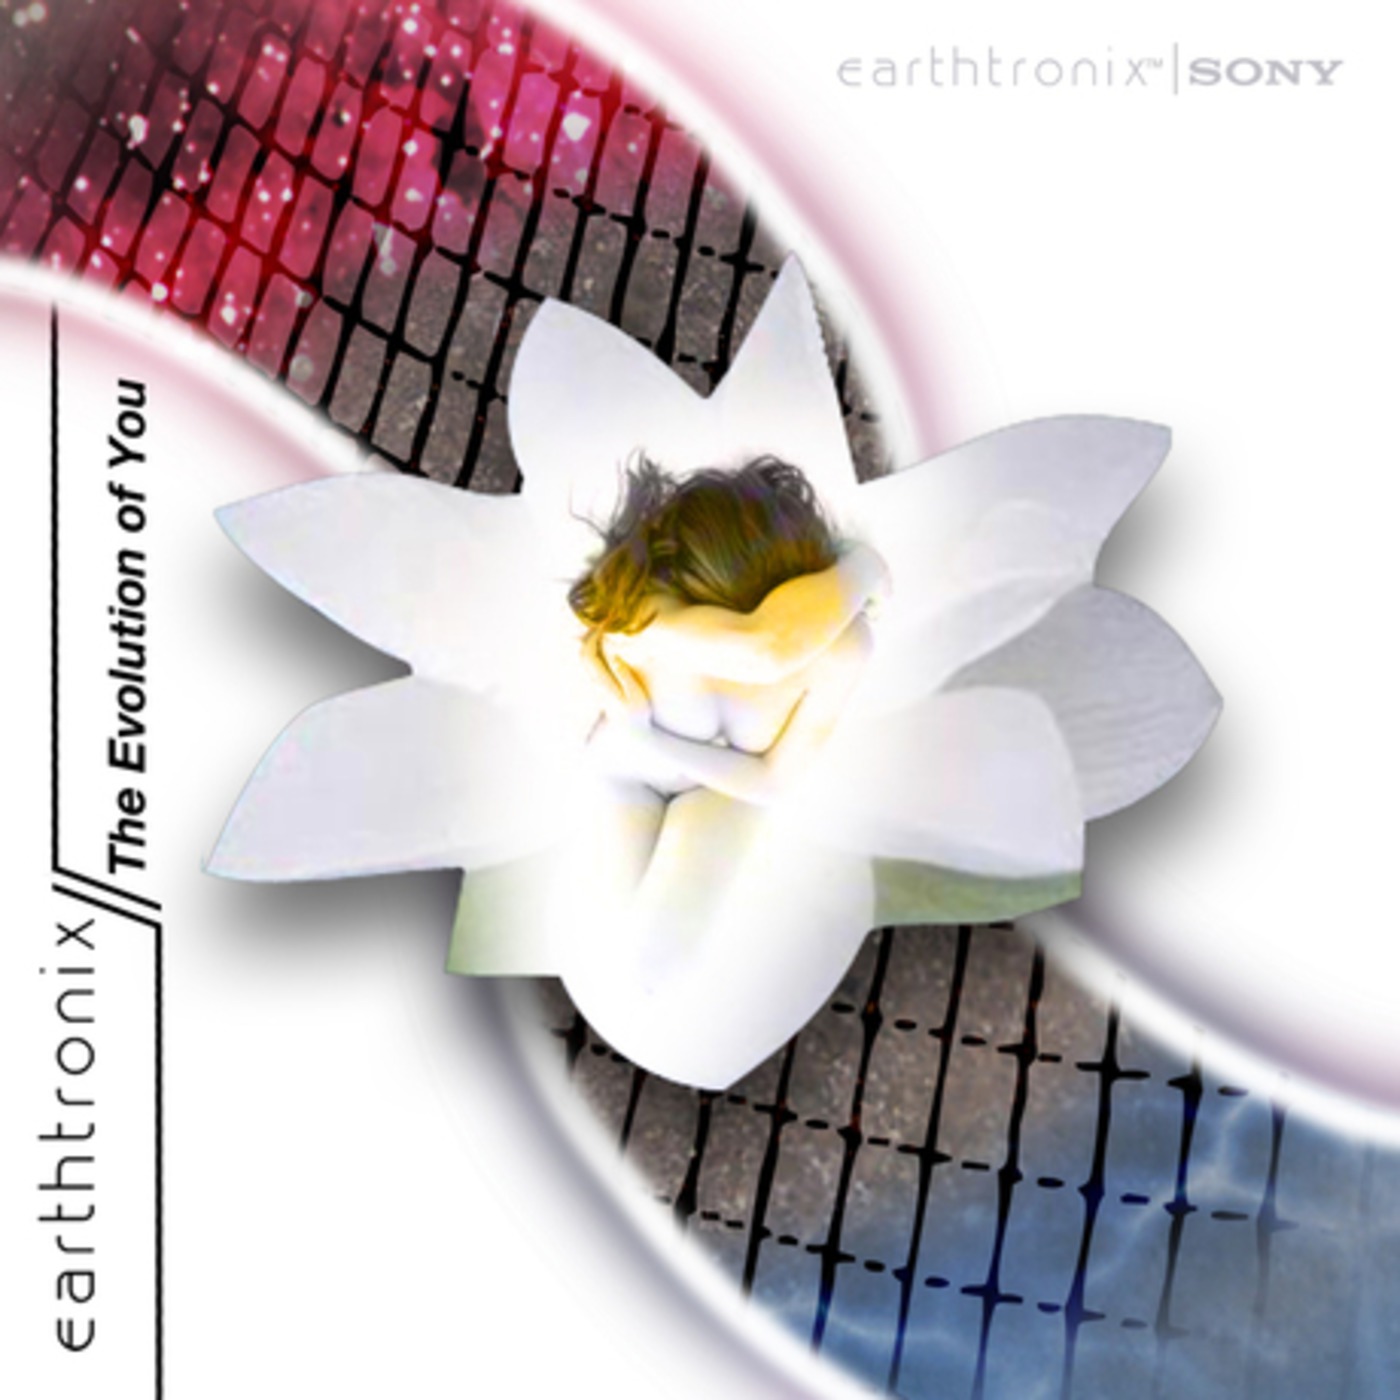 Earthtronix - The Evolution of You (Redux)